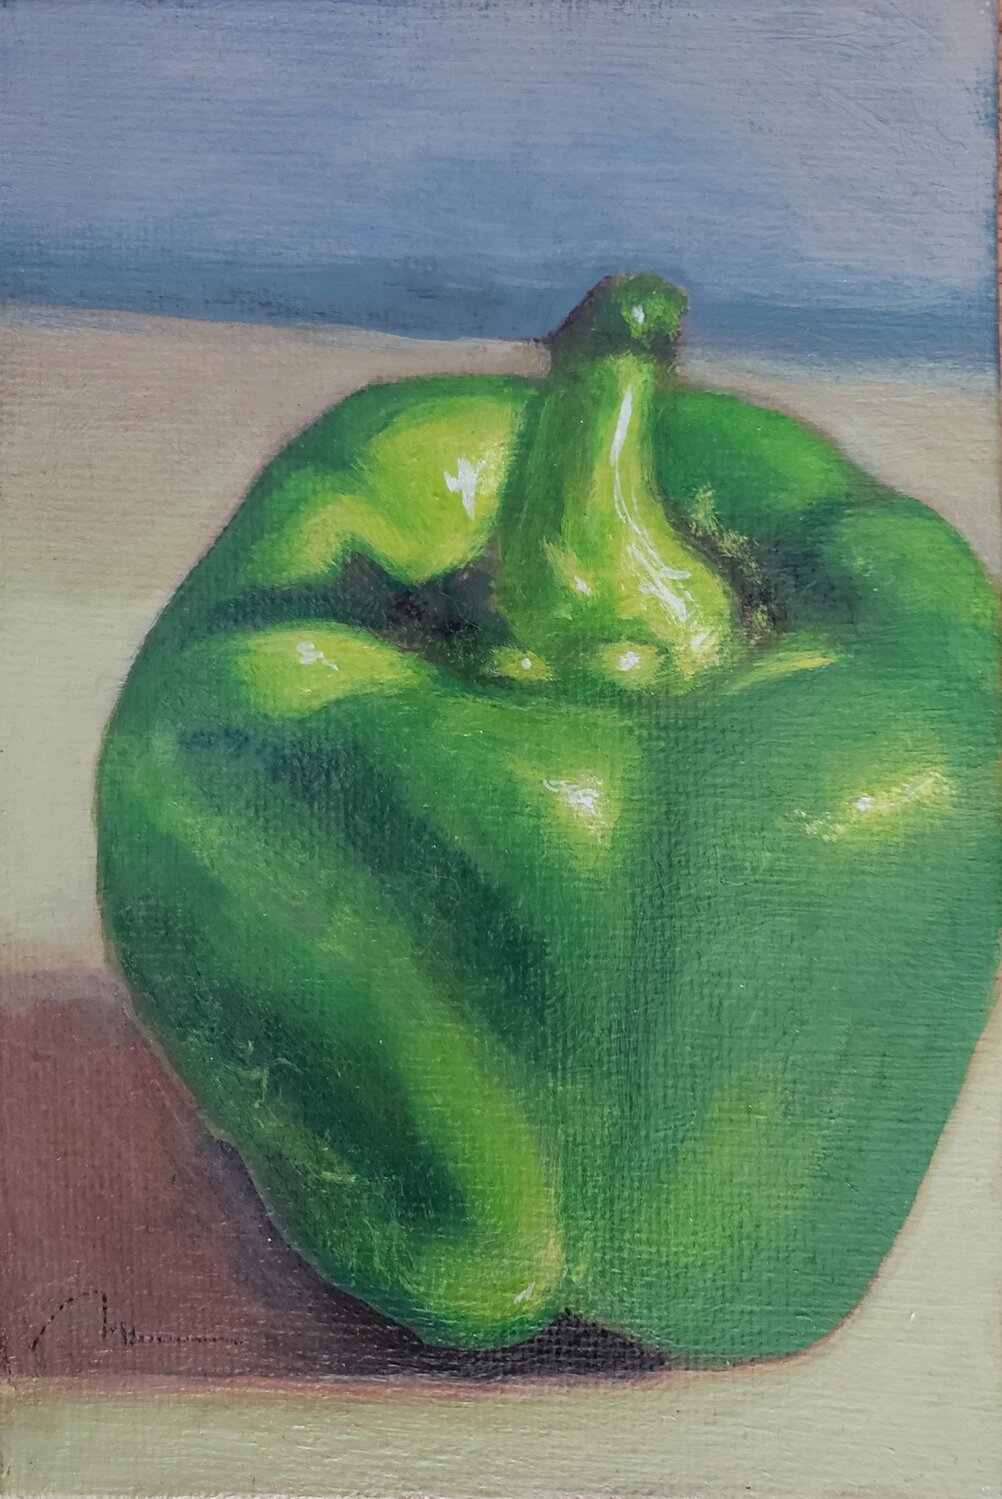 'Green Pepper' is a still-life painting by California artist Michele Rene.